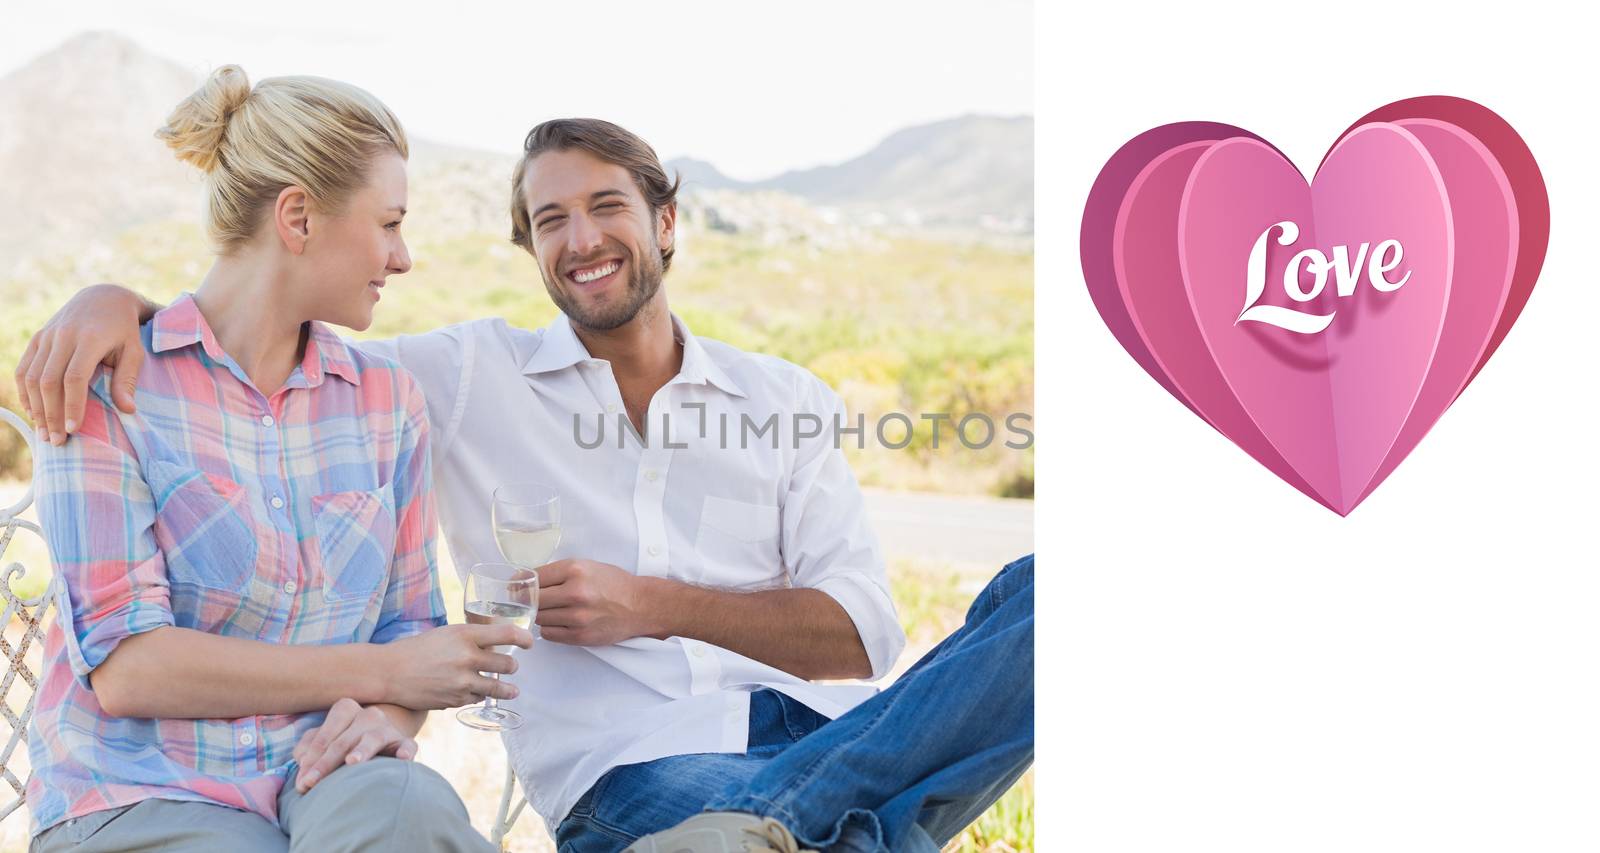 Cute couple sitting in the garden enjoying wine together against love heart